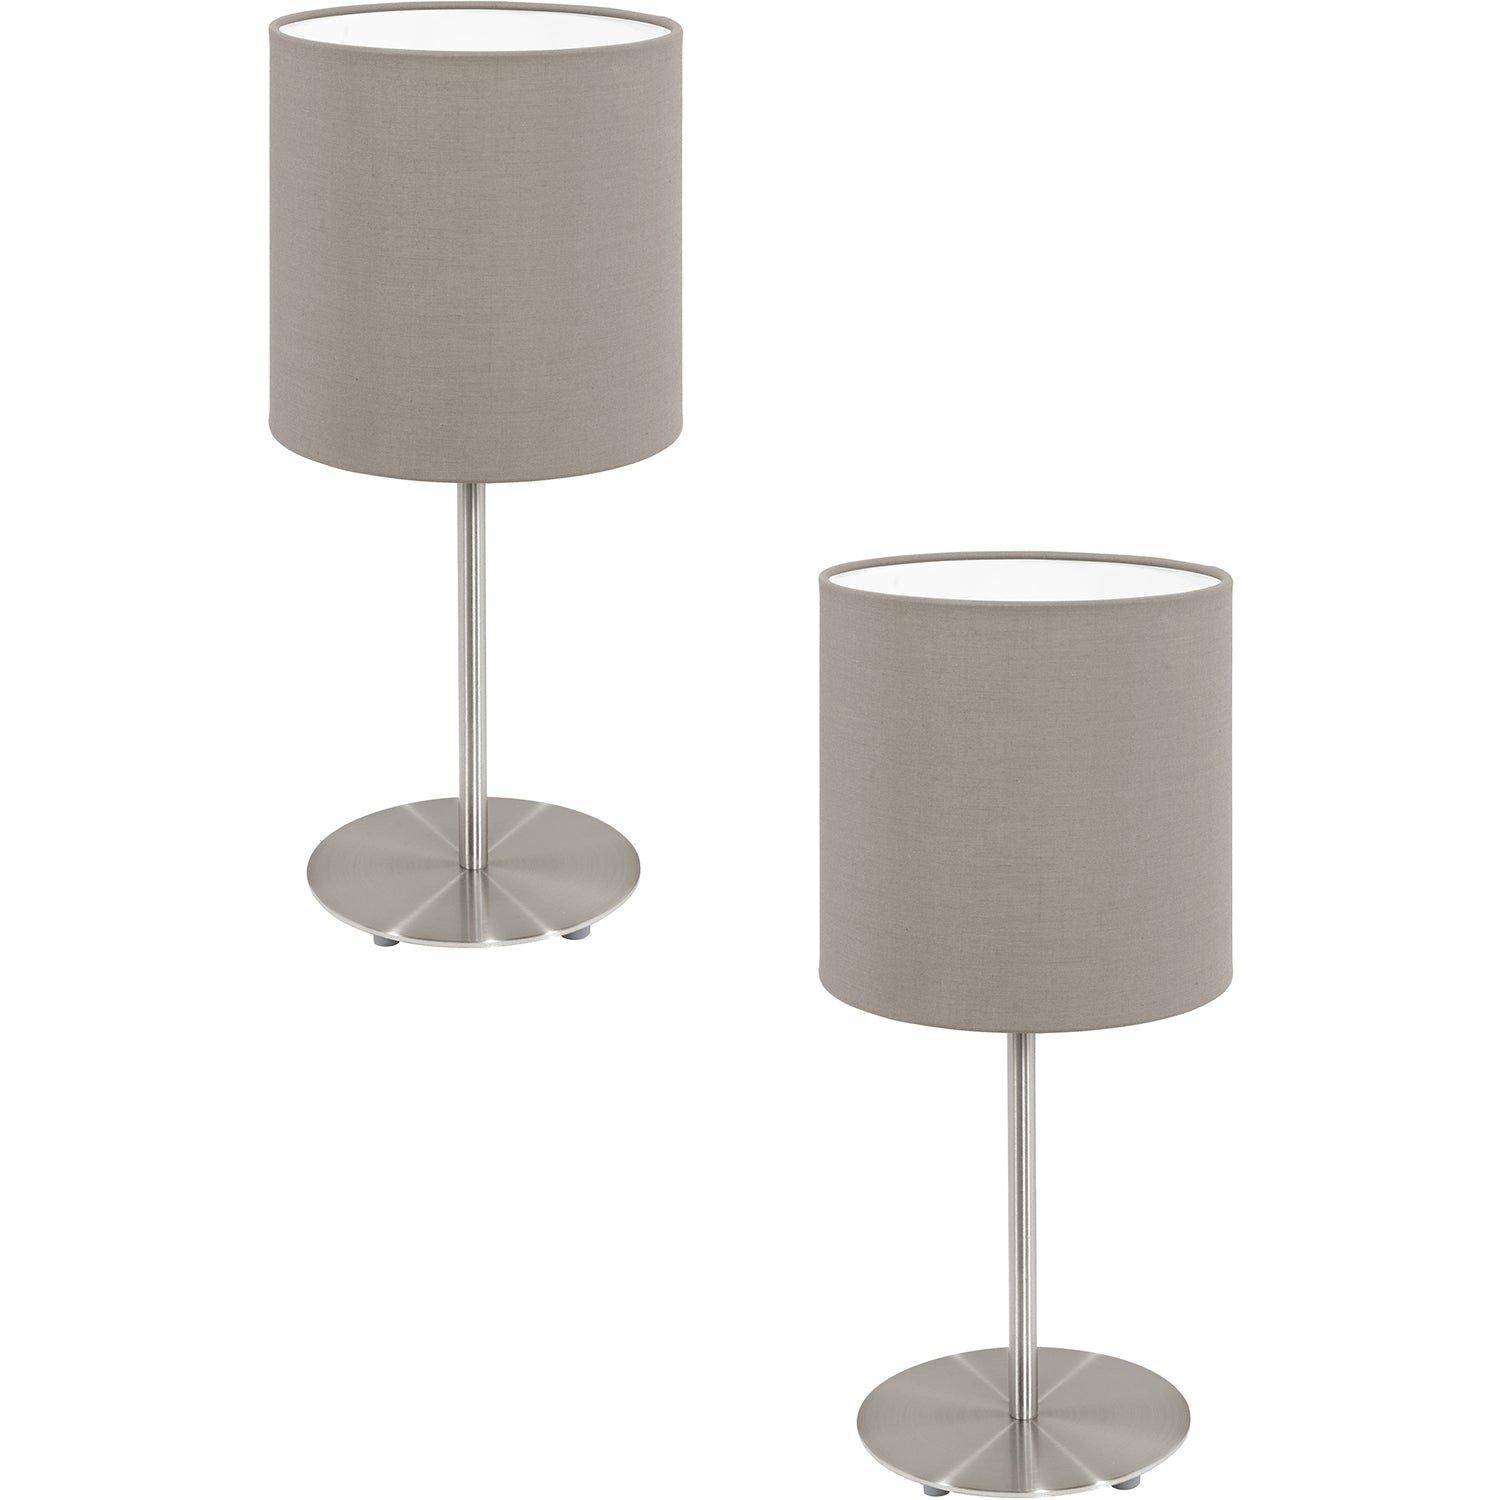 2 PACK Table Desk Lamp Colour Satin Nickel Steel Shade Taupe Fabric E14 1x40W